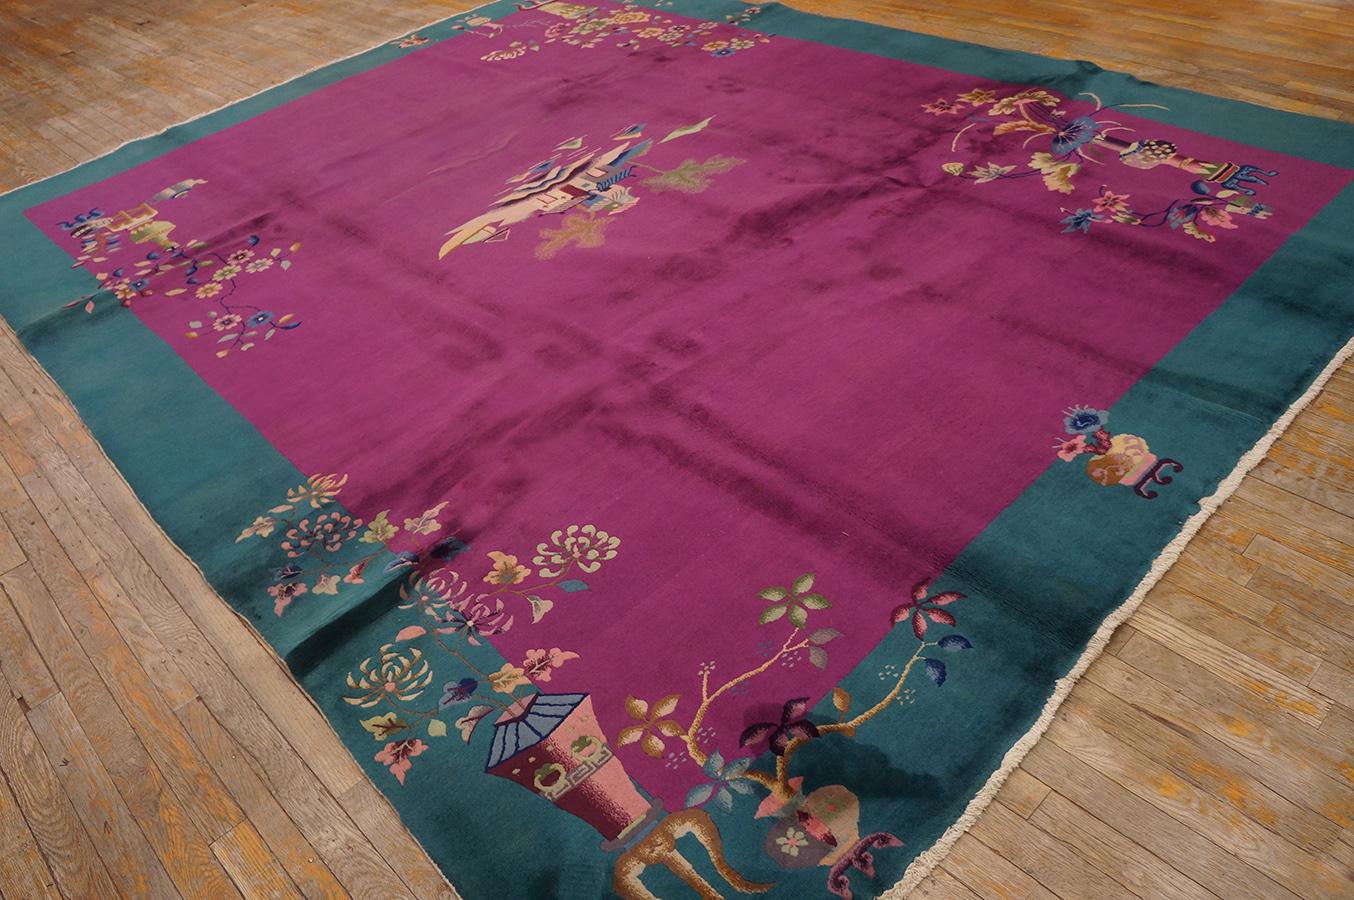 1920s Chinese Art Deco Carpet with a purple color background 
( 8'10